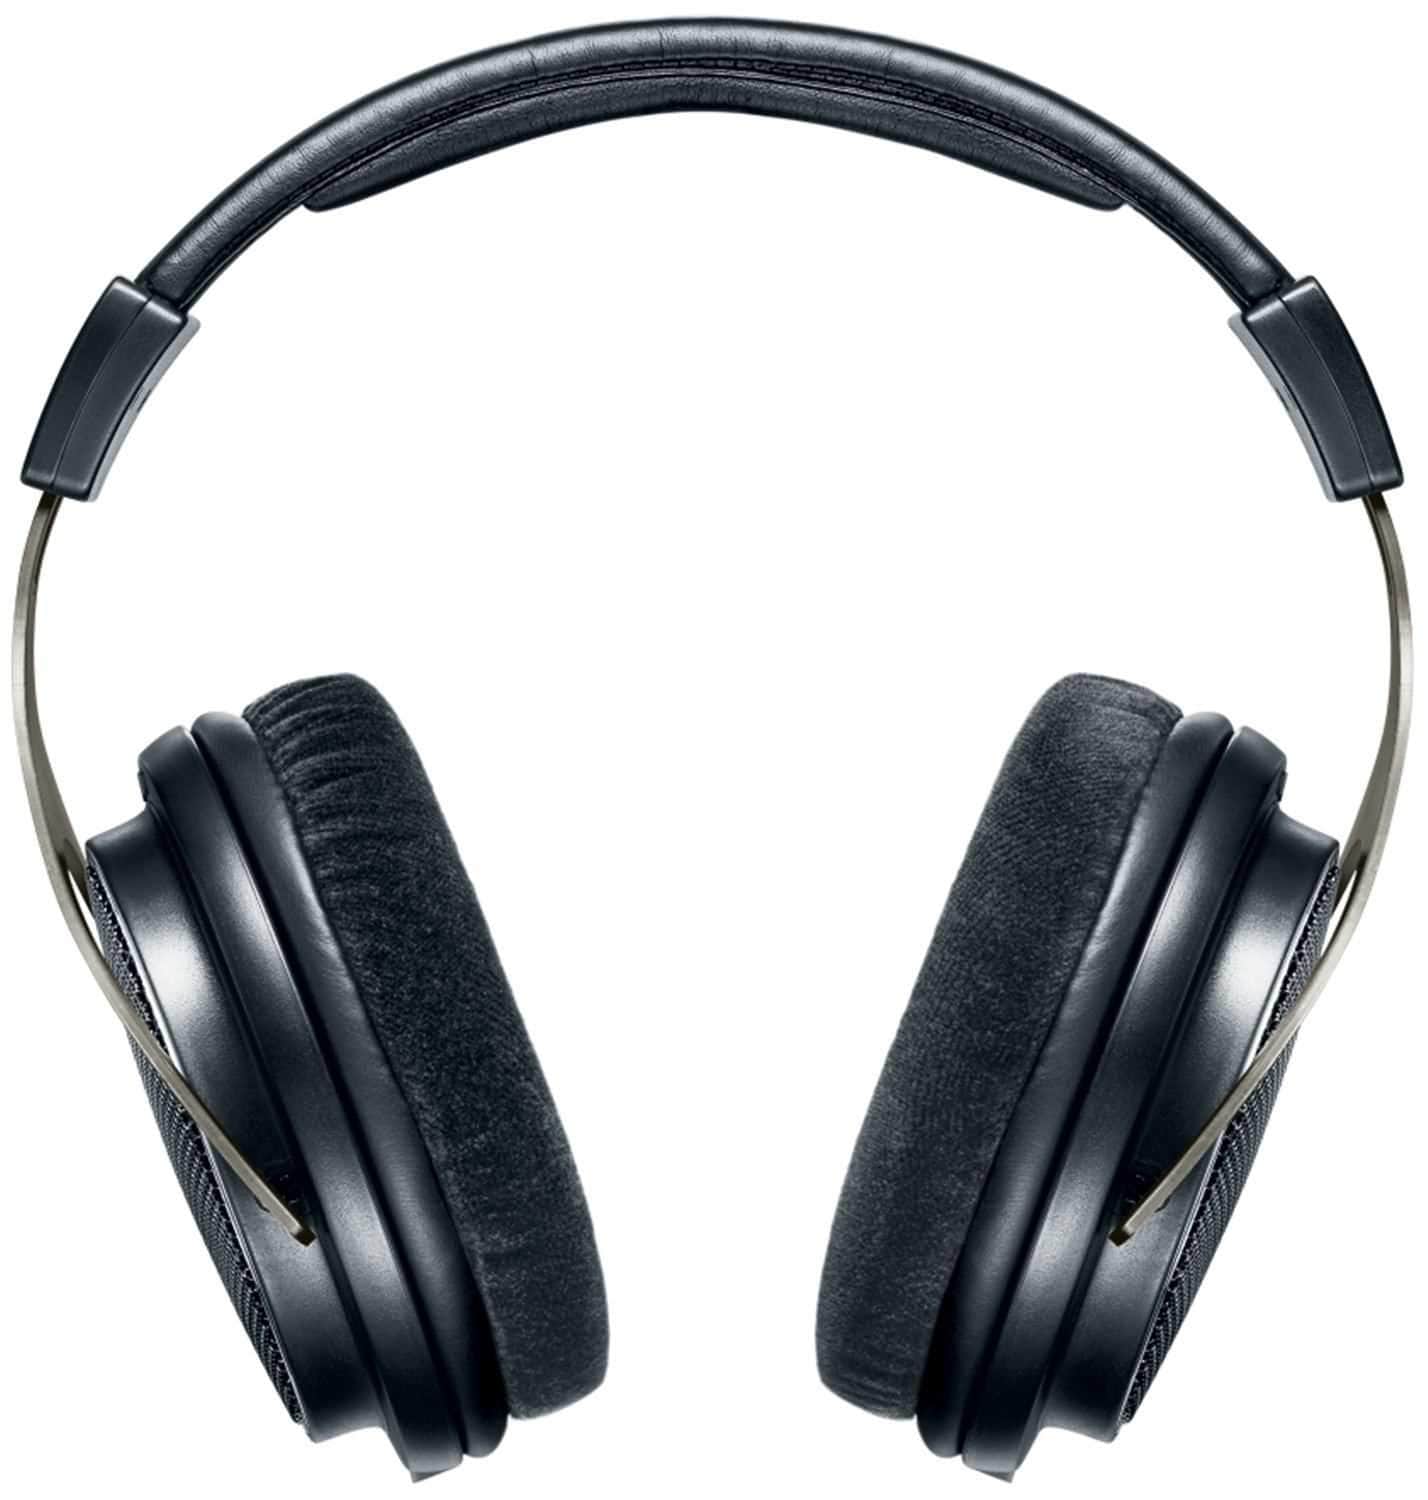 Shure SRH1840 Deluxe Ultra Pro Open Back Headphones - PSSL ProSound and Stage Lighting